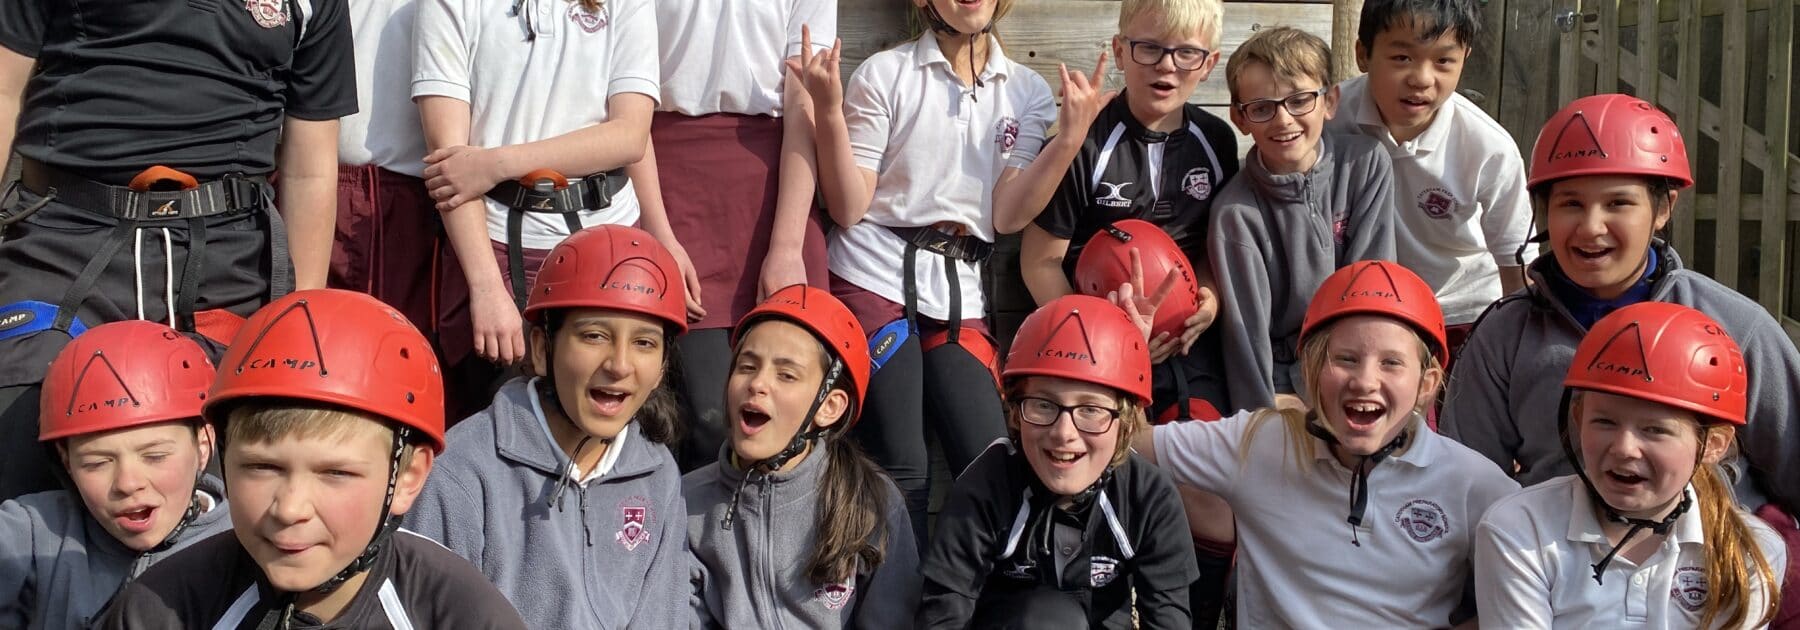 Wildcats Club reach new heights at the Climbing Wall